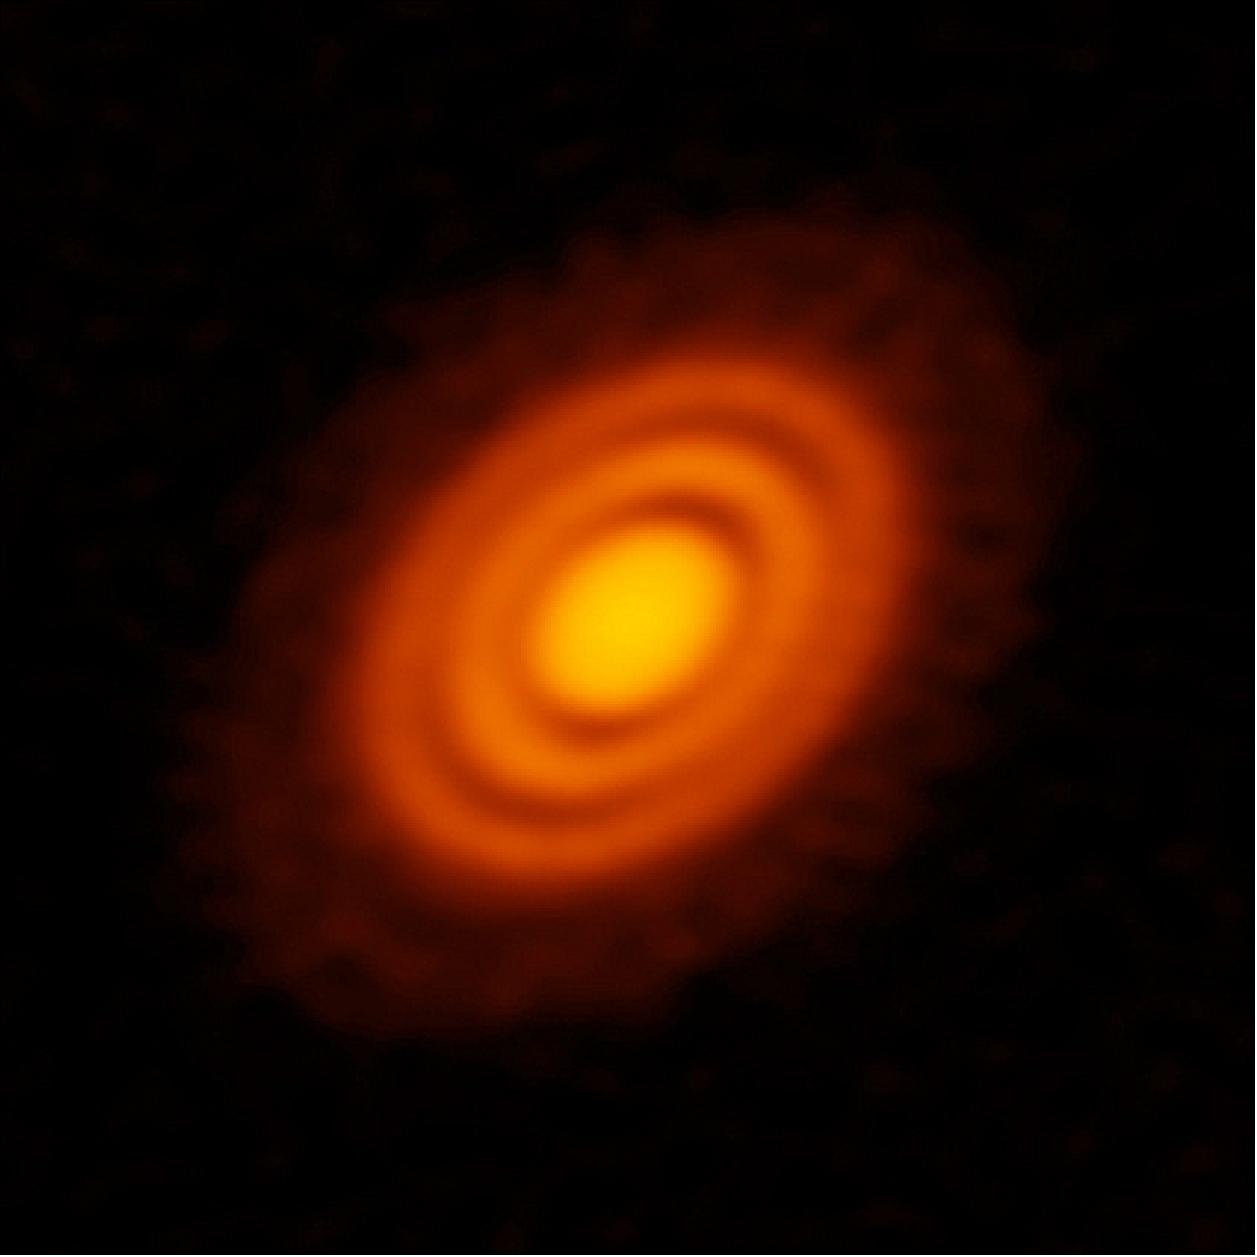 Figure 43: ALMA image of the protoplanetary disk surrounding the young star HD 163296 as seen in dust. New observations suggested that two planets, each about the size of Saturn, are in orbit around the star. These planets, which are not yet fully formed, revealed themselves by the dual imprint they left in both the dust and the gas portions of the star's protoplanetary disk [image credit: ALMA (ESO/NAOJ/NRAO); A. Isella; B. Saxton (NRAO/AUI/NSF)]